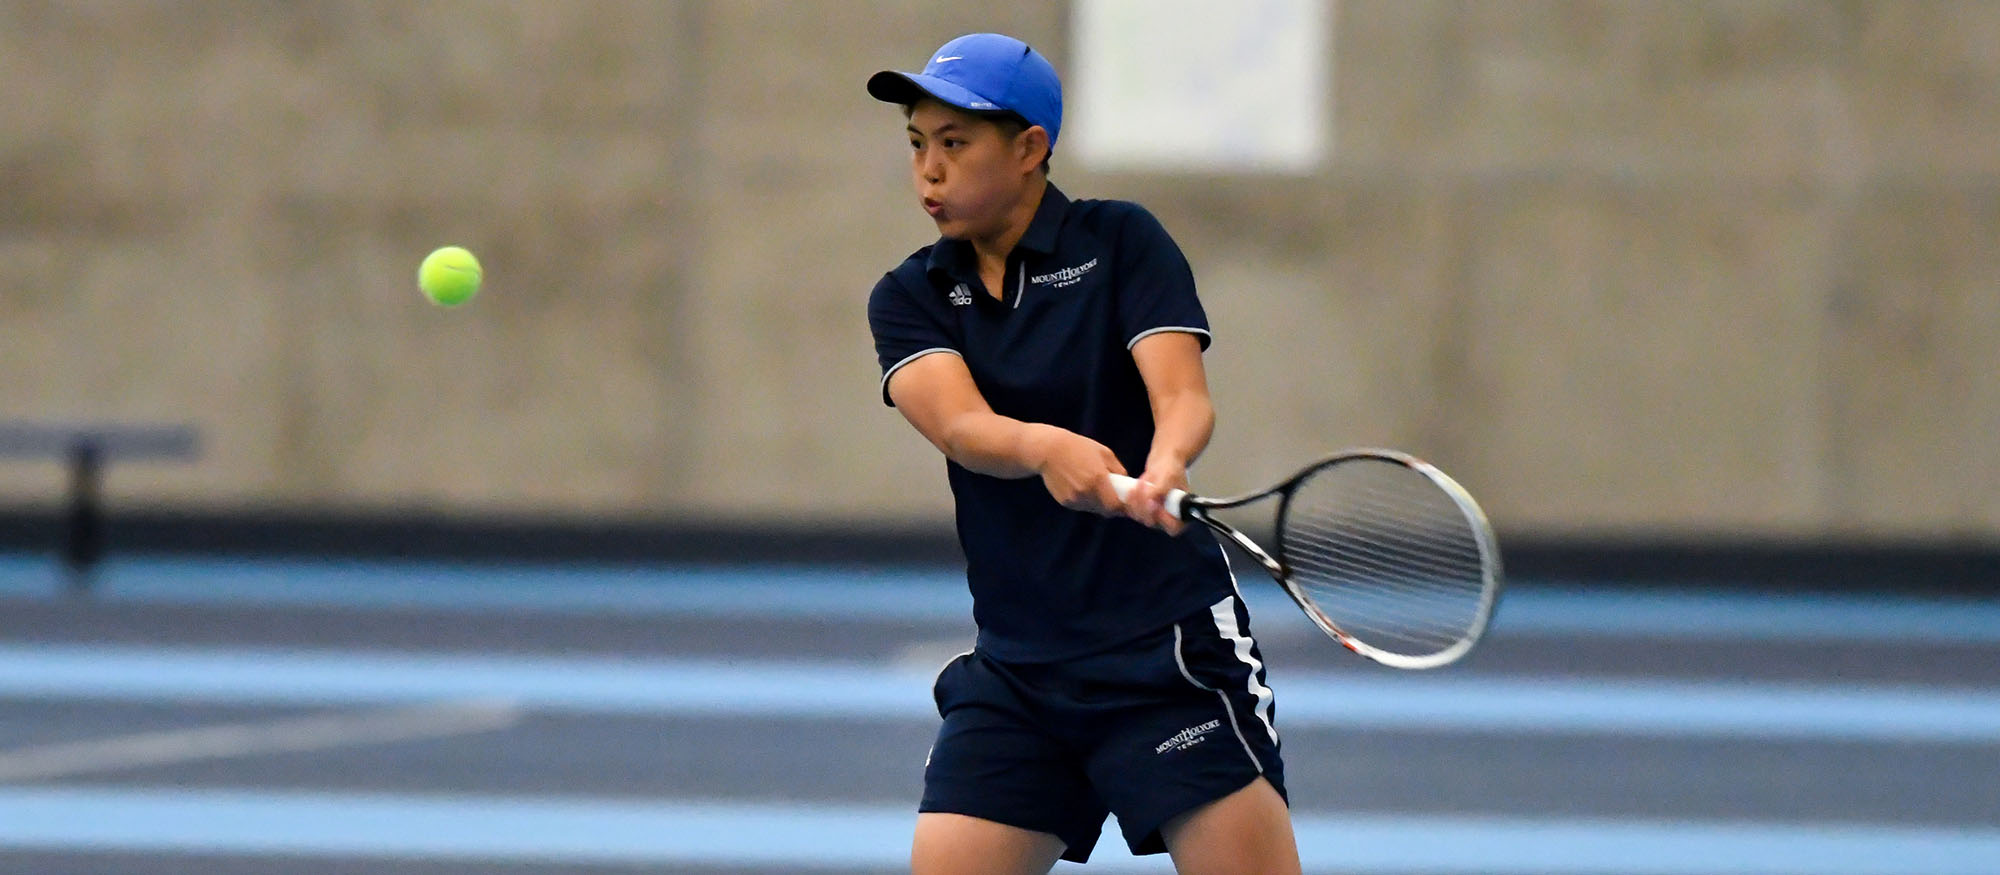 Action photo of Lyons tennis player, Ching-Ching Huang.